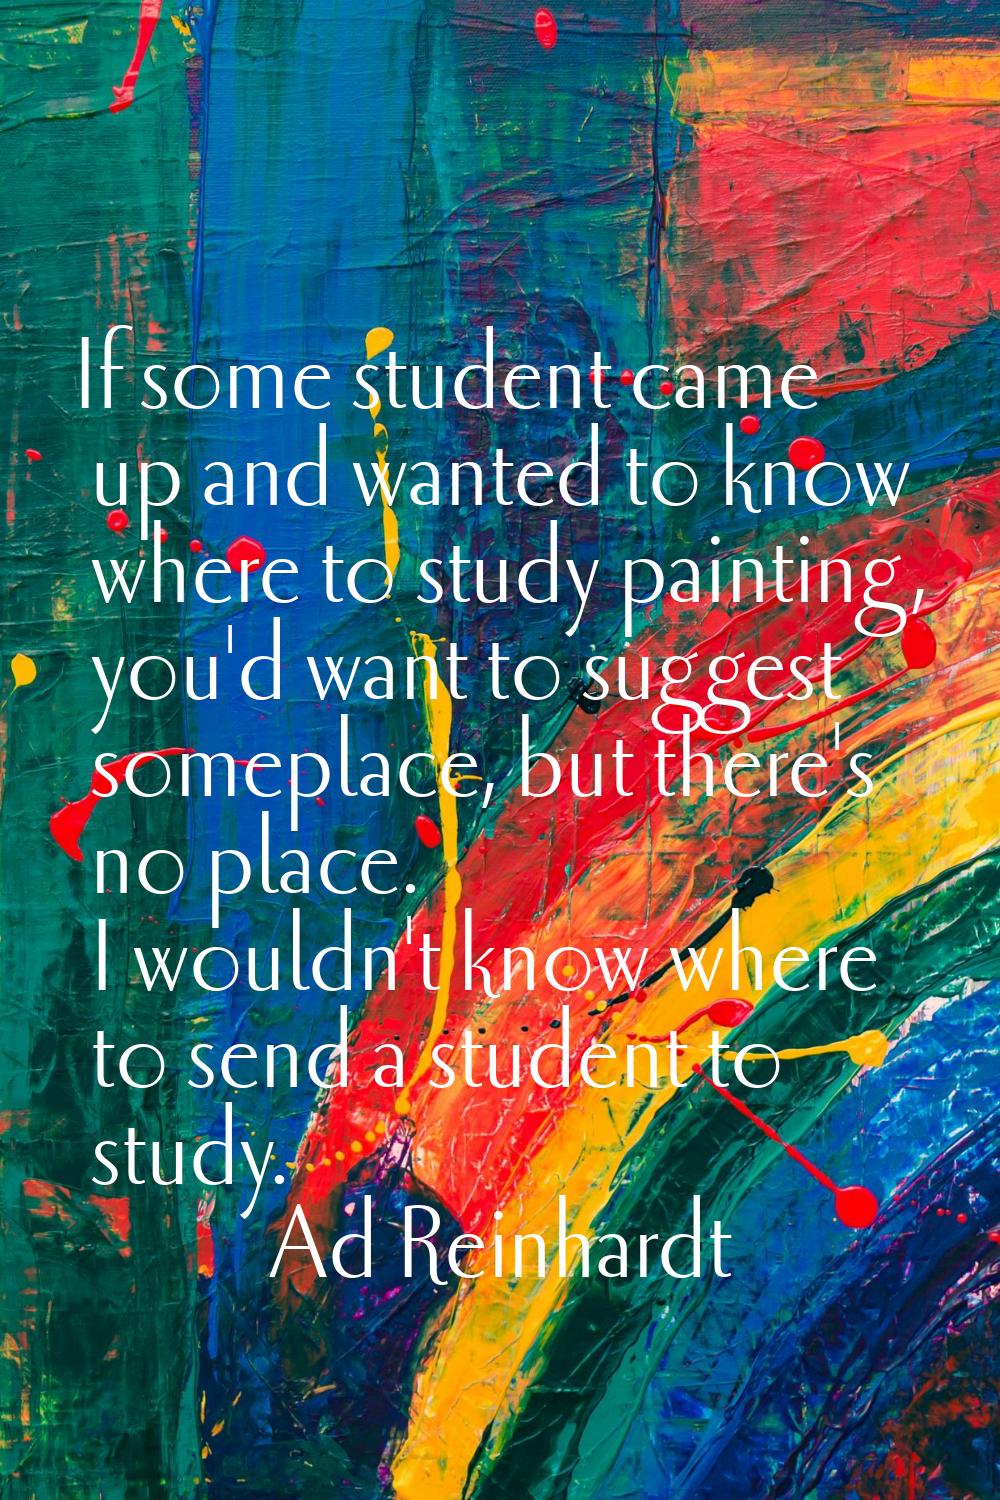 If some student came up and wanted to know where to study painting, you'd want to suggest someplace